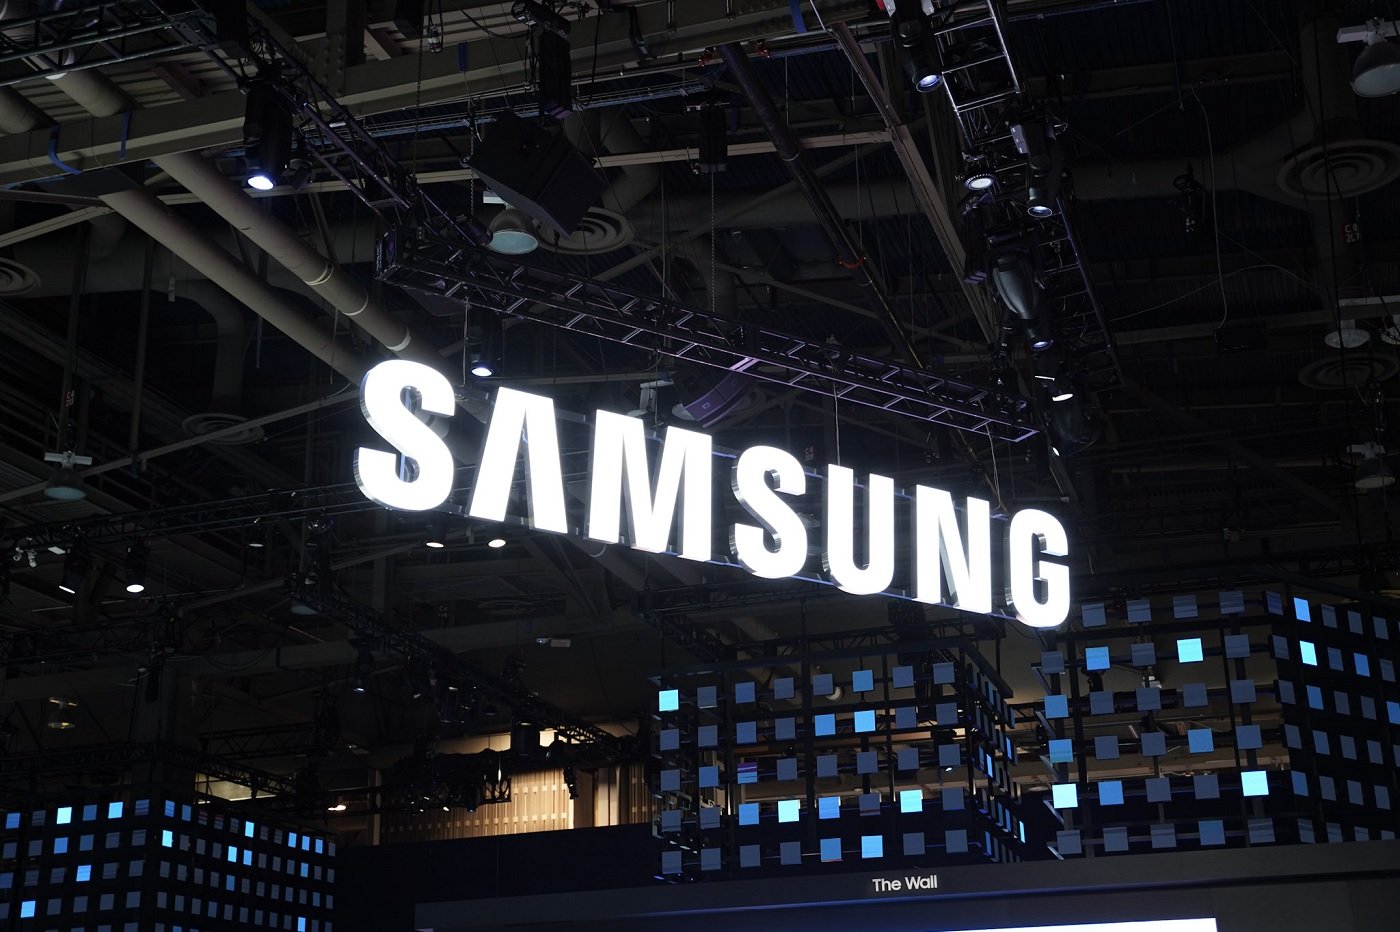 Samsung would prepare a new smartphone